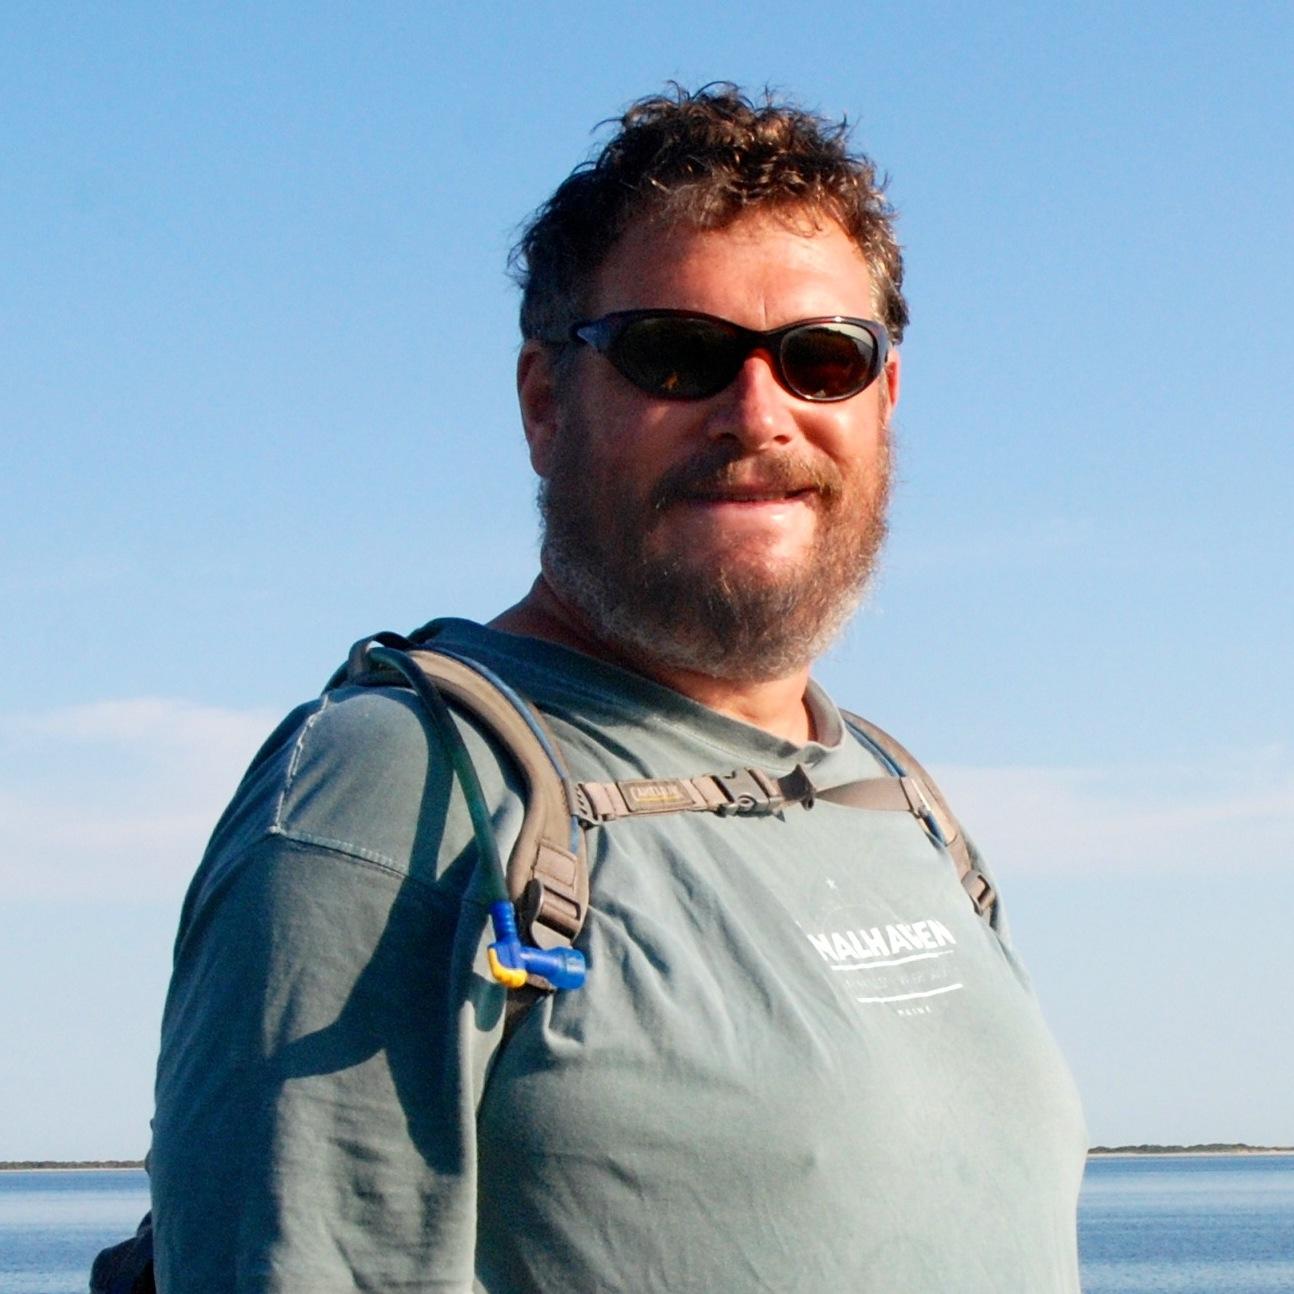 Island explorer. Owner of Nantucket Walkabout guiding natural history hikes on conservation land all over Nantucket.